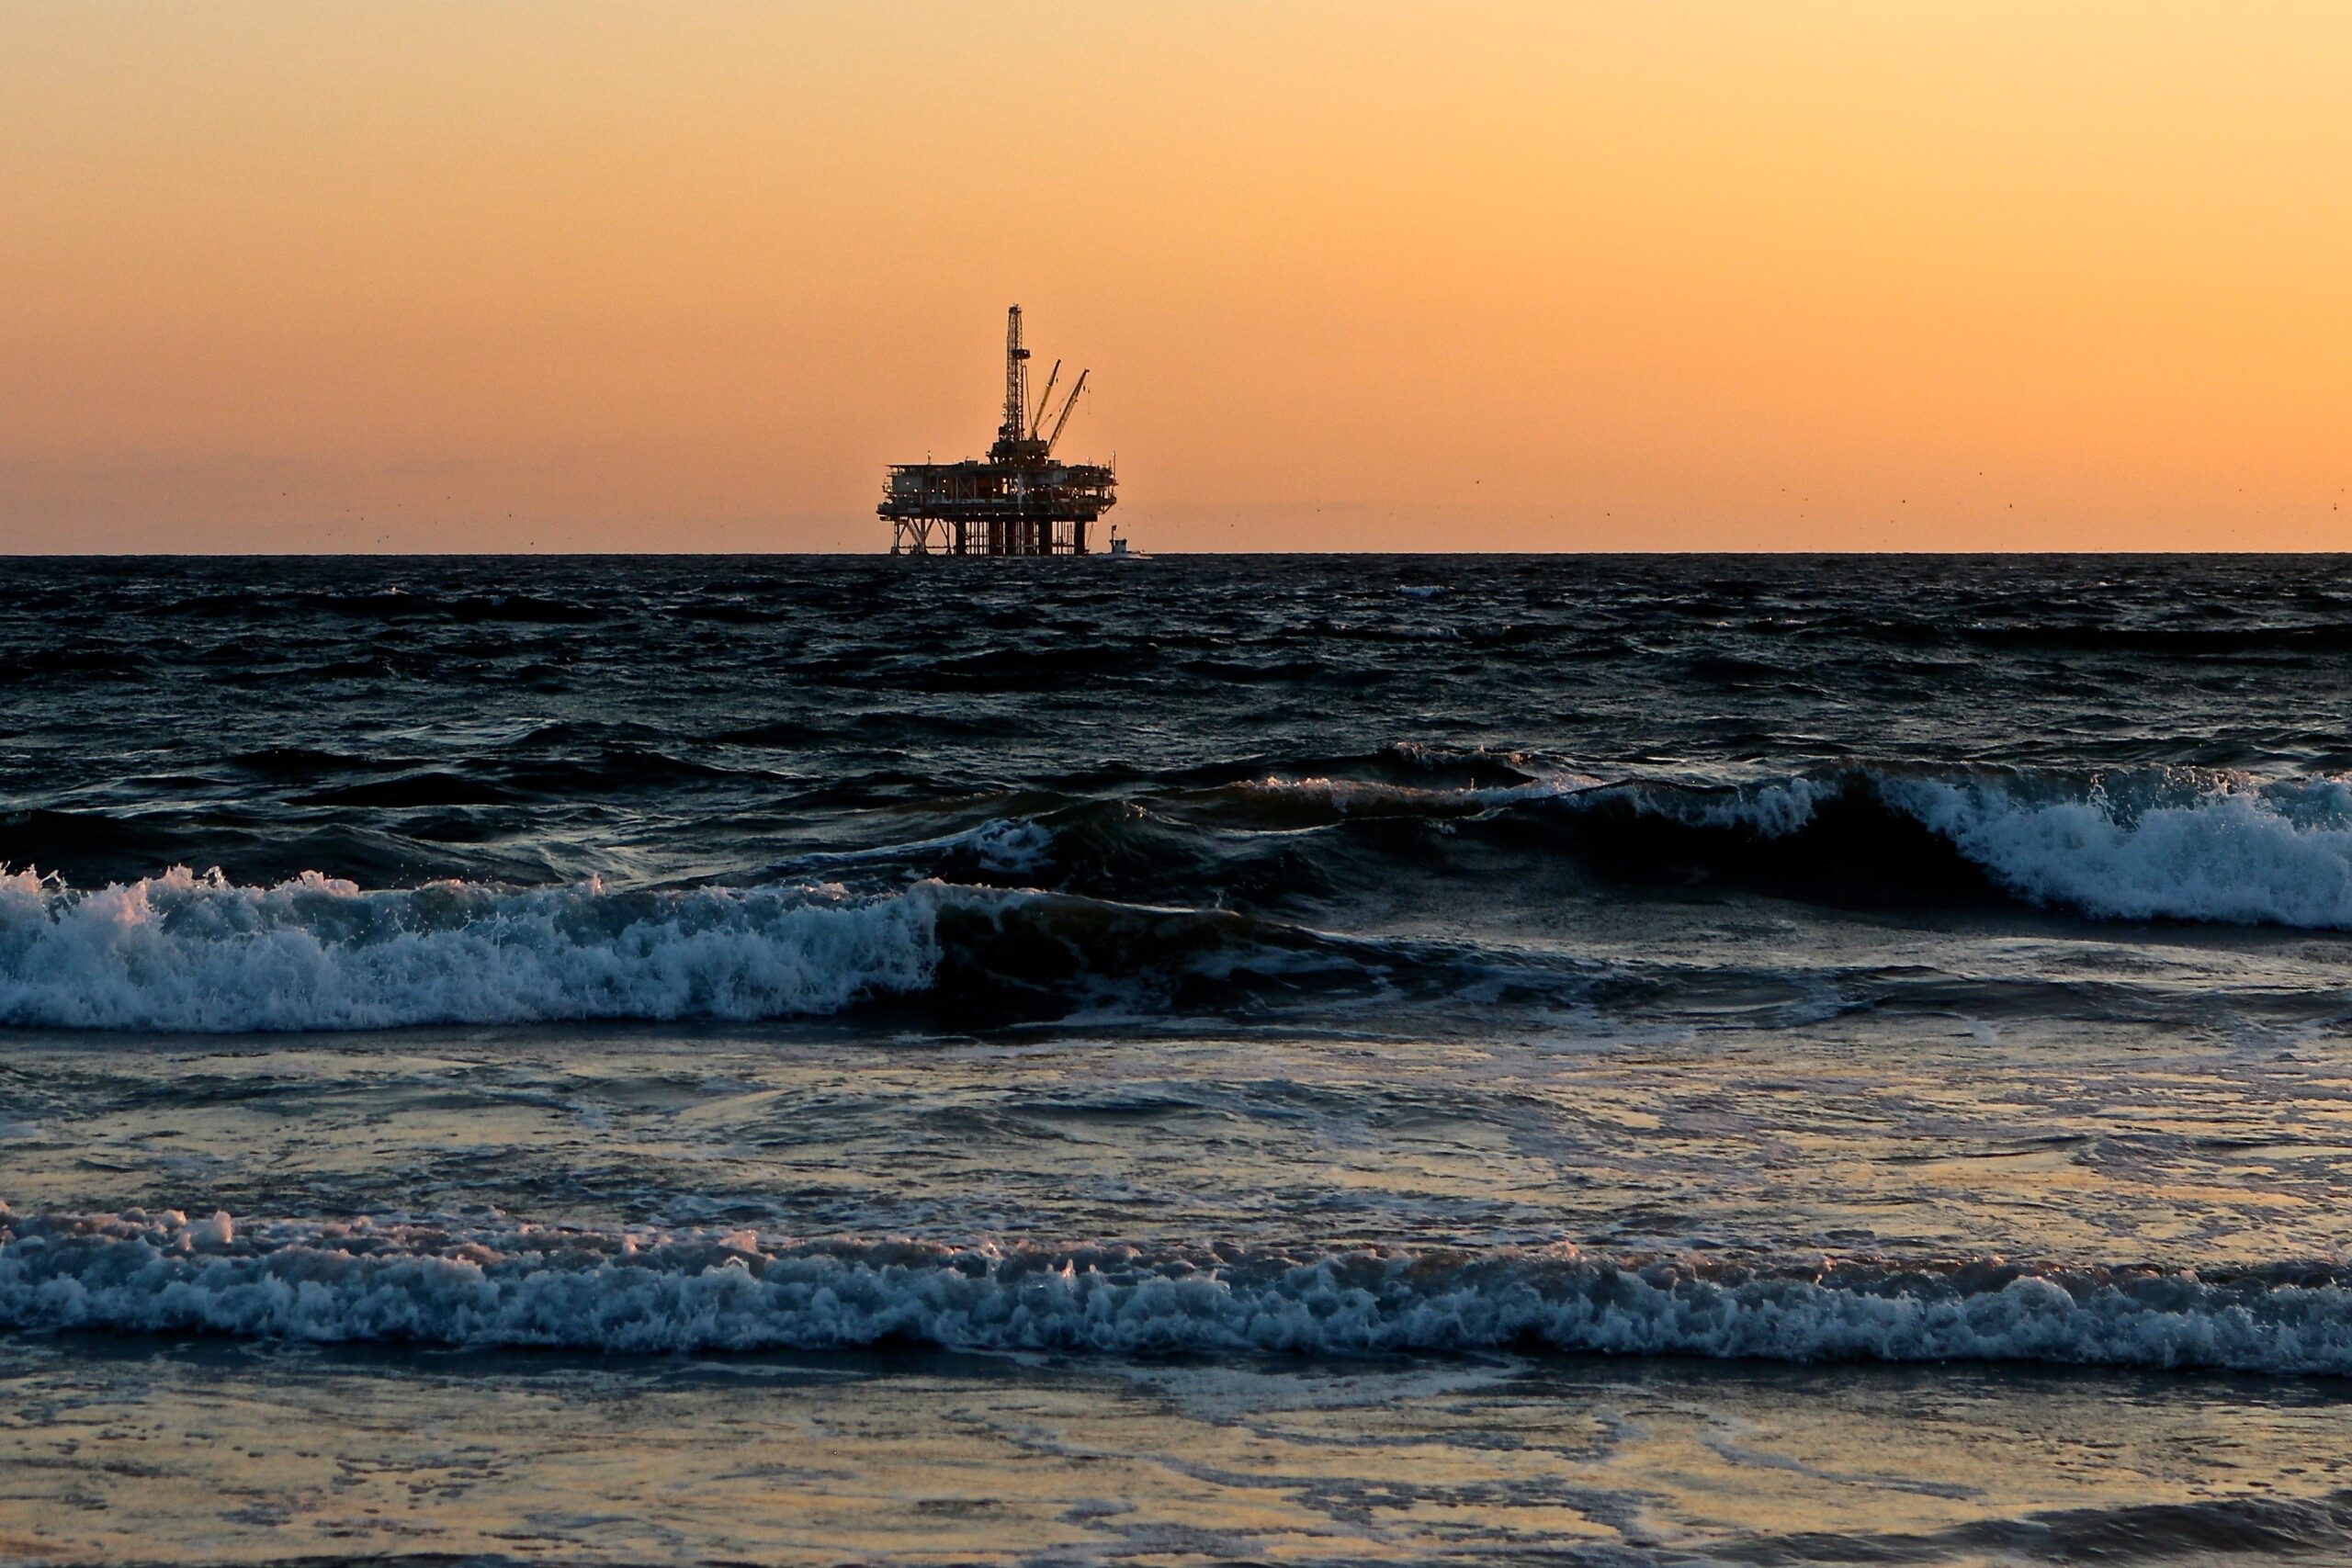 Offshore oil rig, viewed in the distance from the shore with waves crashing in the foreground